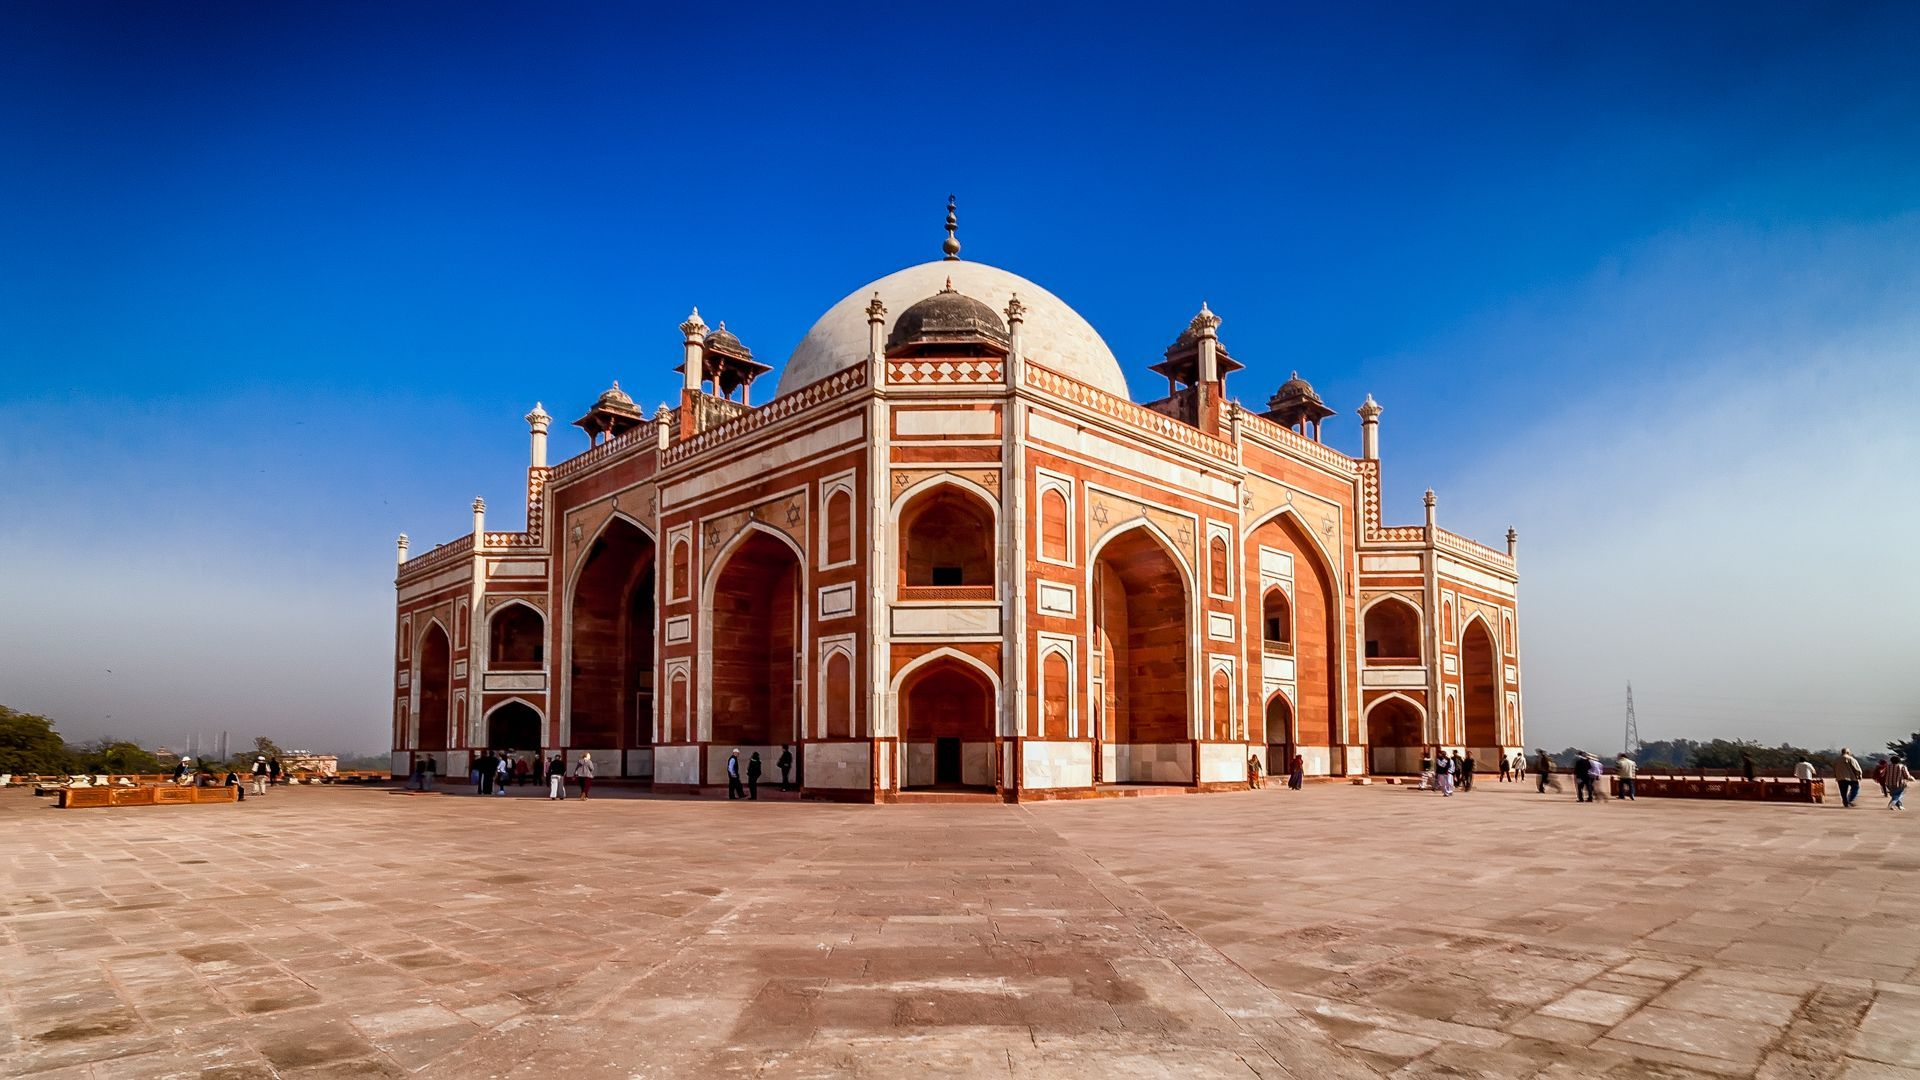 Humayuns Tomb Wallpaper. Mughal architecture, Monument in india, Historical place